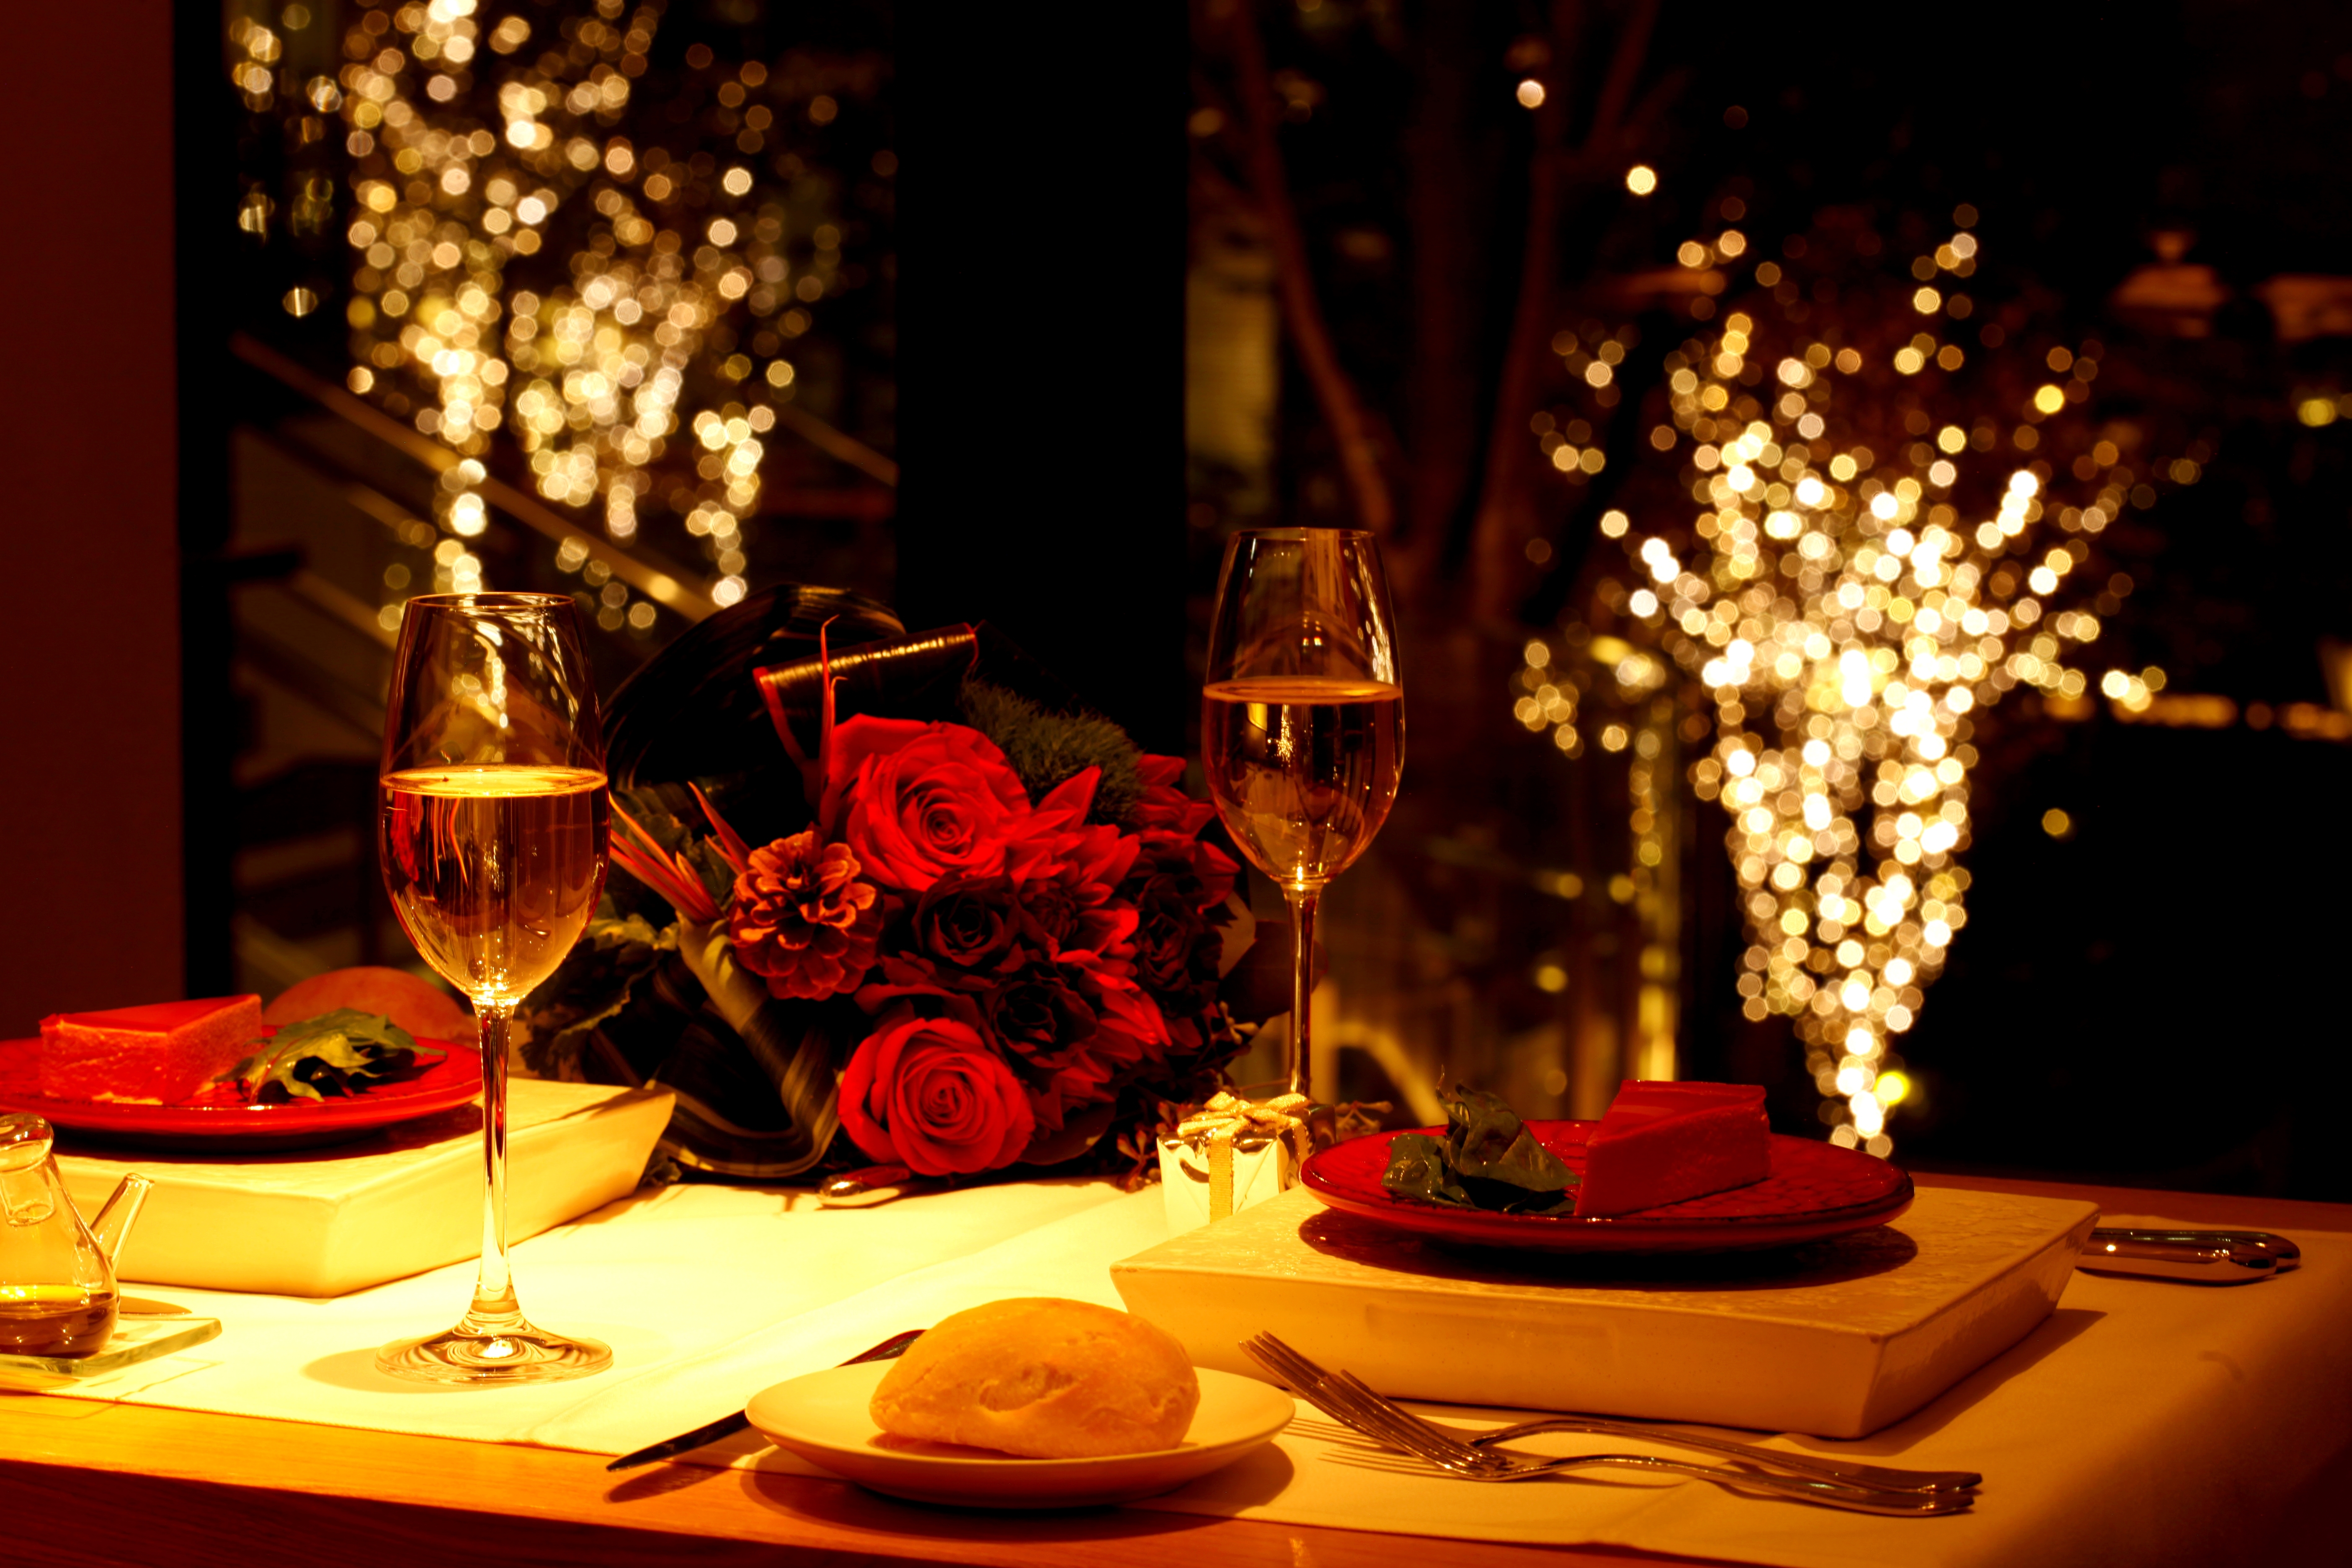 Valentine's Day Dinner Dress Codes Defined - Exclusive Corporate Image